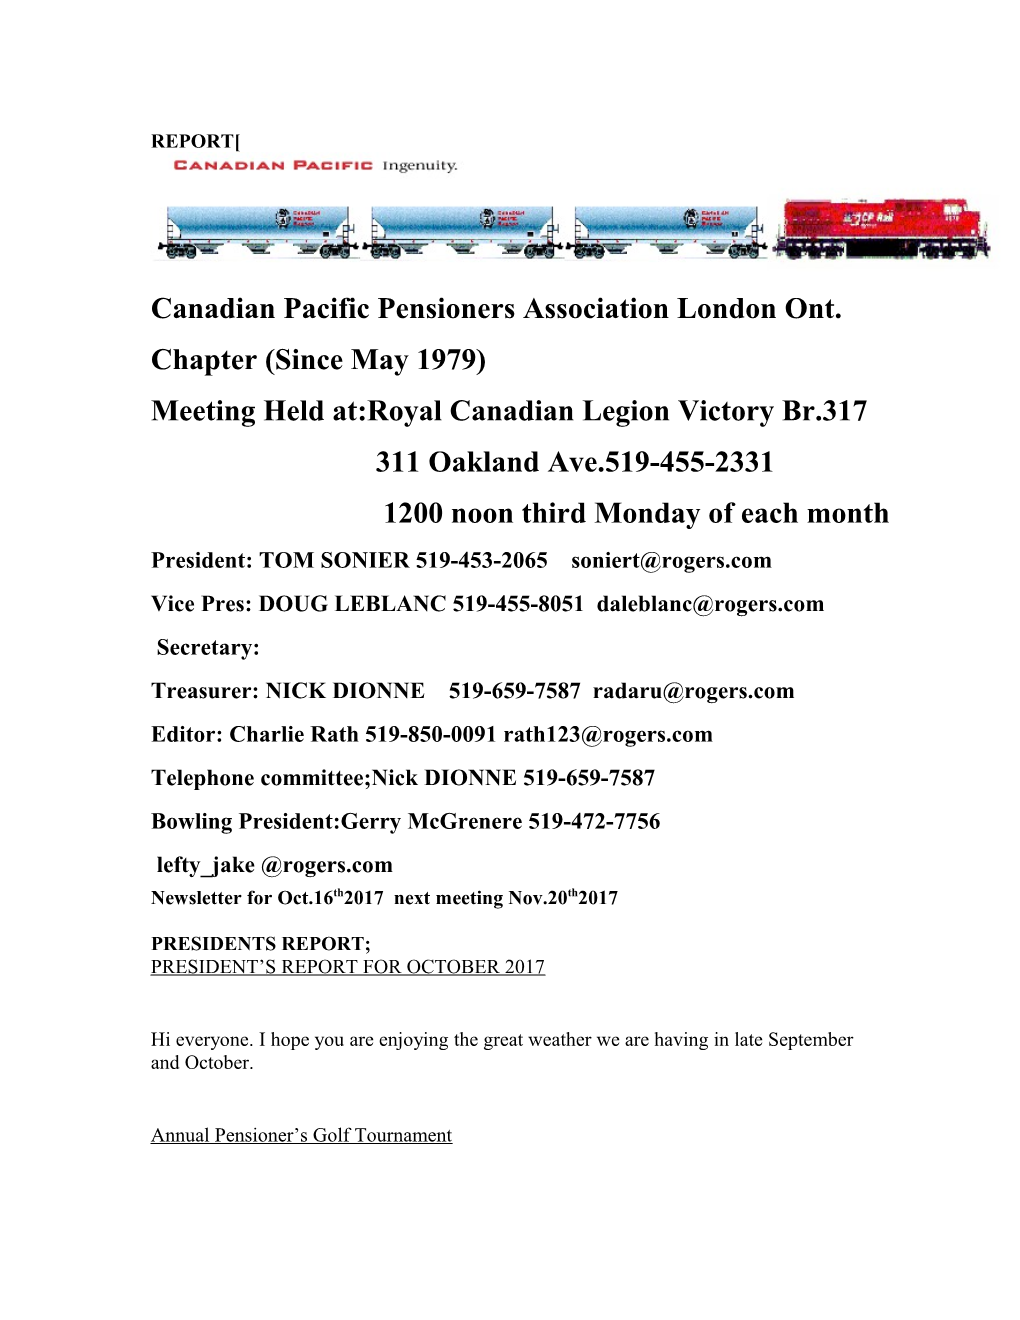 Canadian Pacific Pensioners Association London Ont